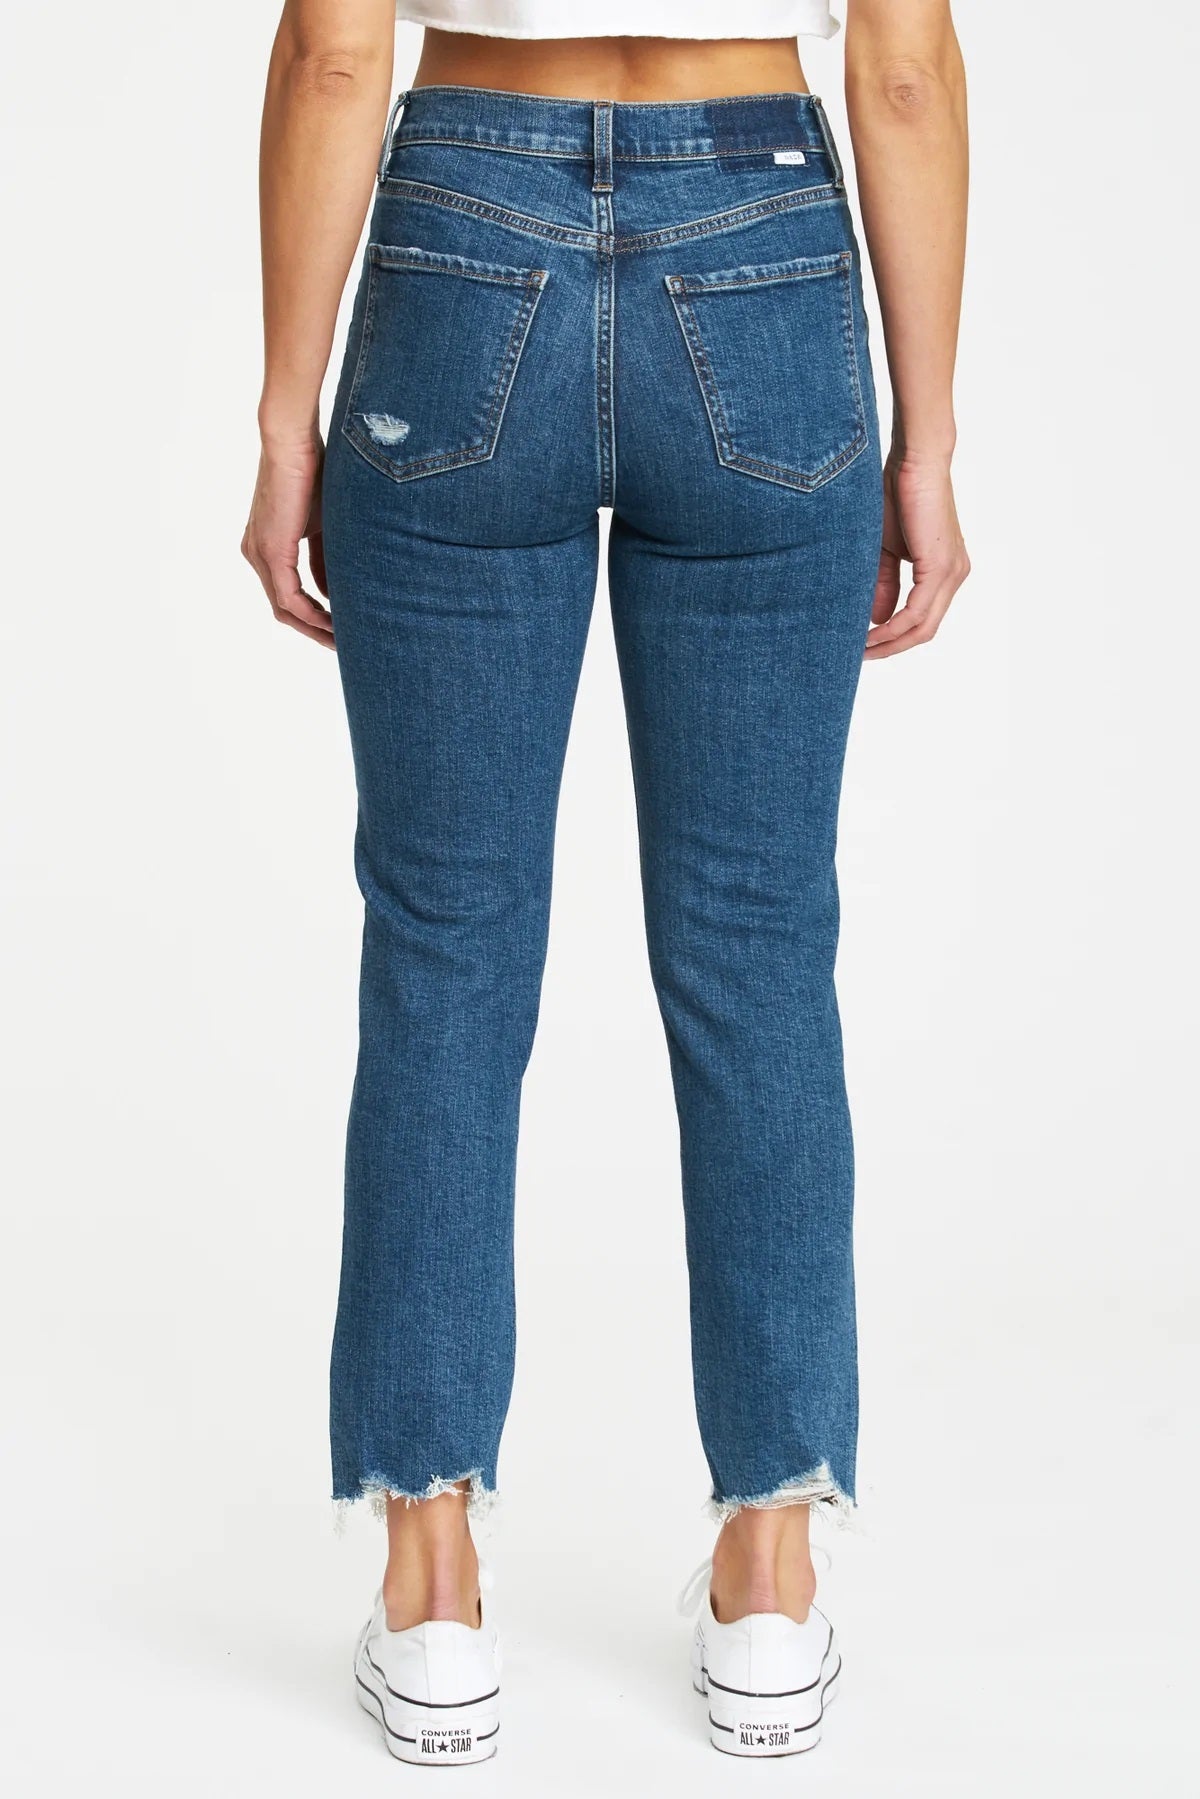 Daze, Daily Driver High Rise Skinny Straight in A Plus - Boutique Dandelion